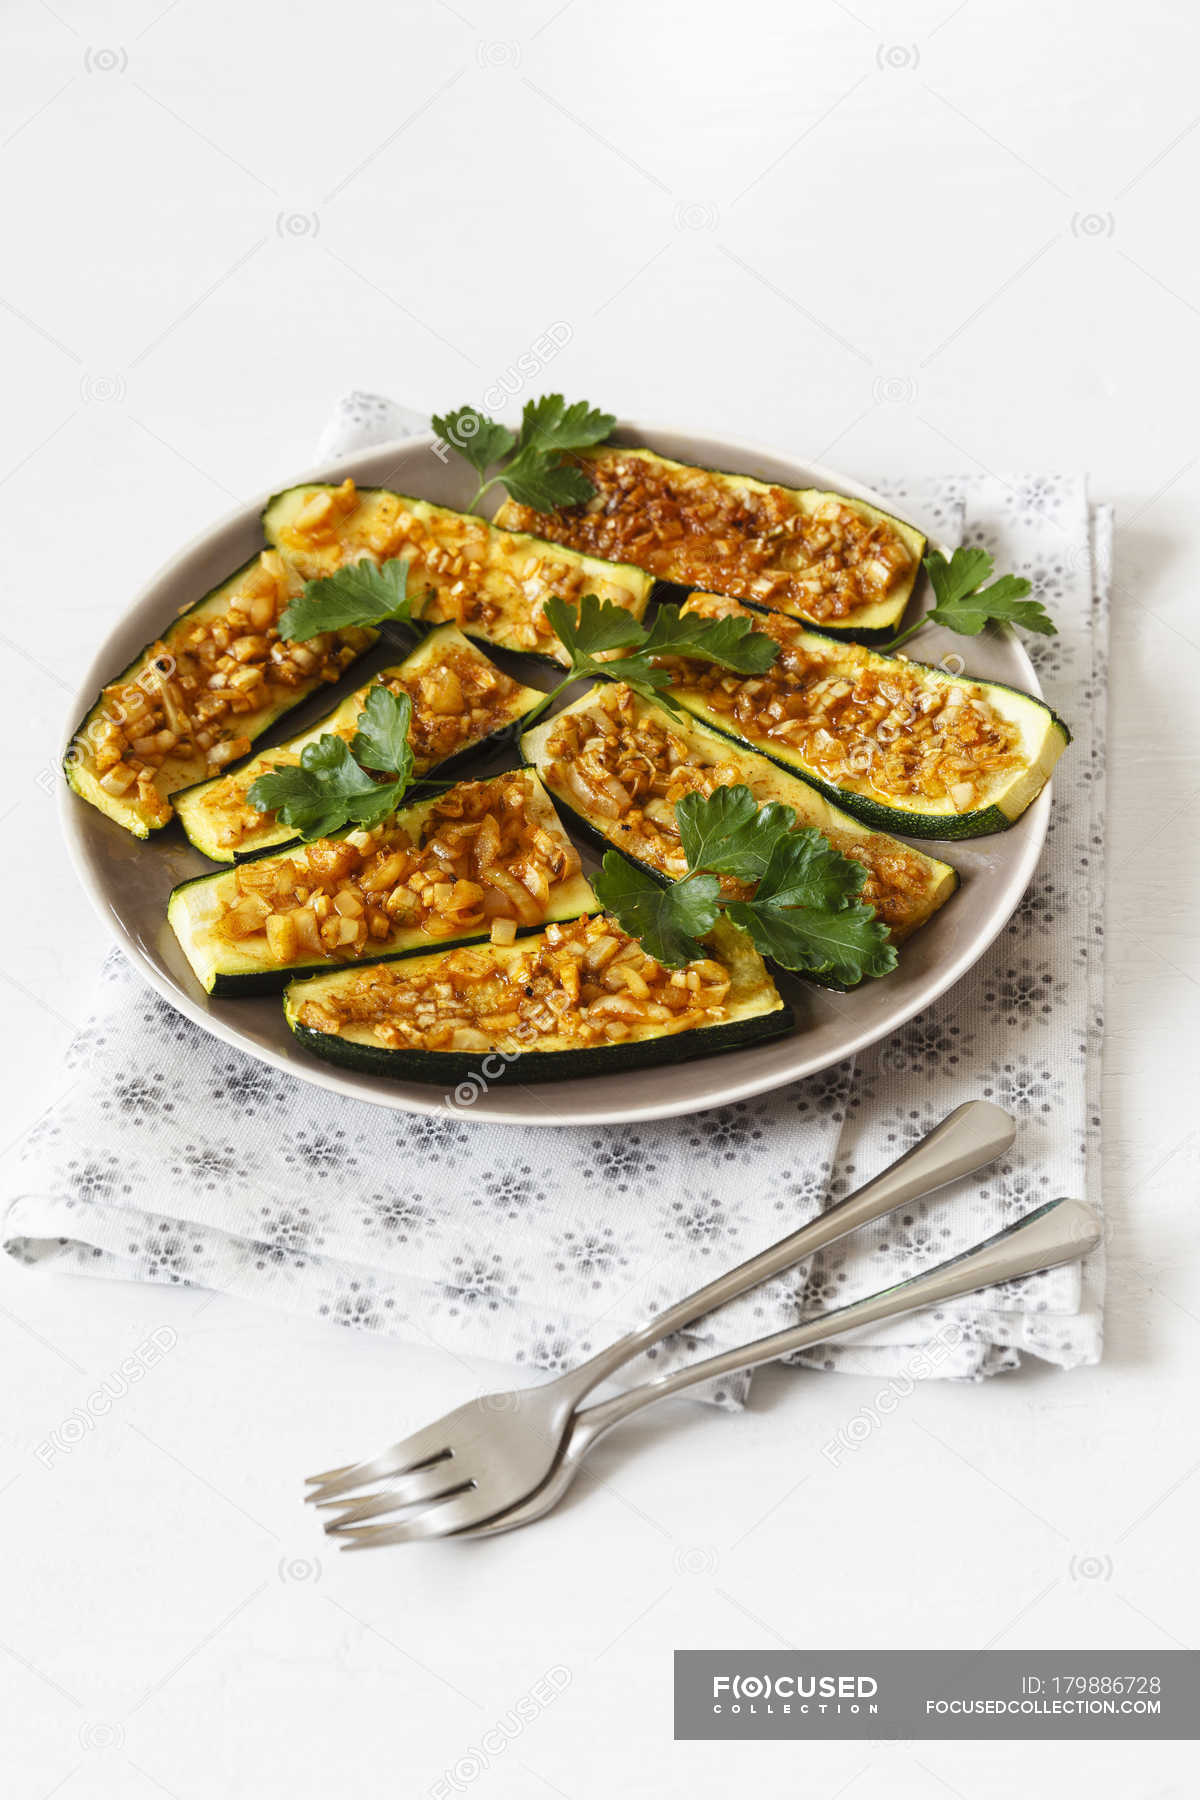 Gratinated sliced courgettes with Chermoula — leaves, knife - Stock Photo |  #179886728